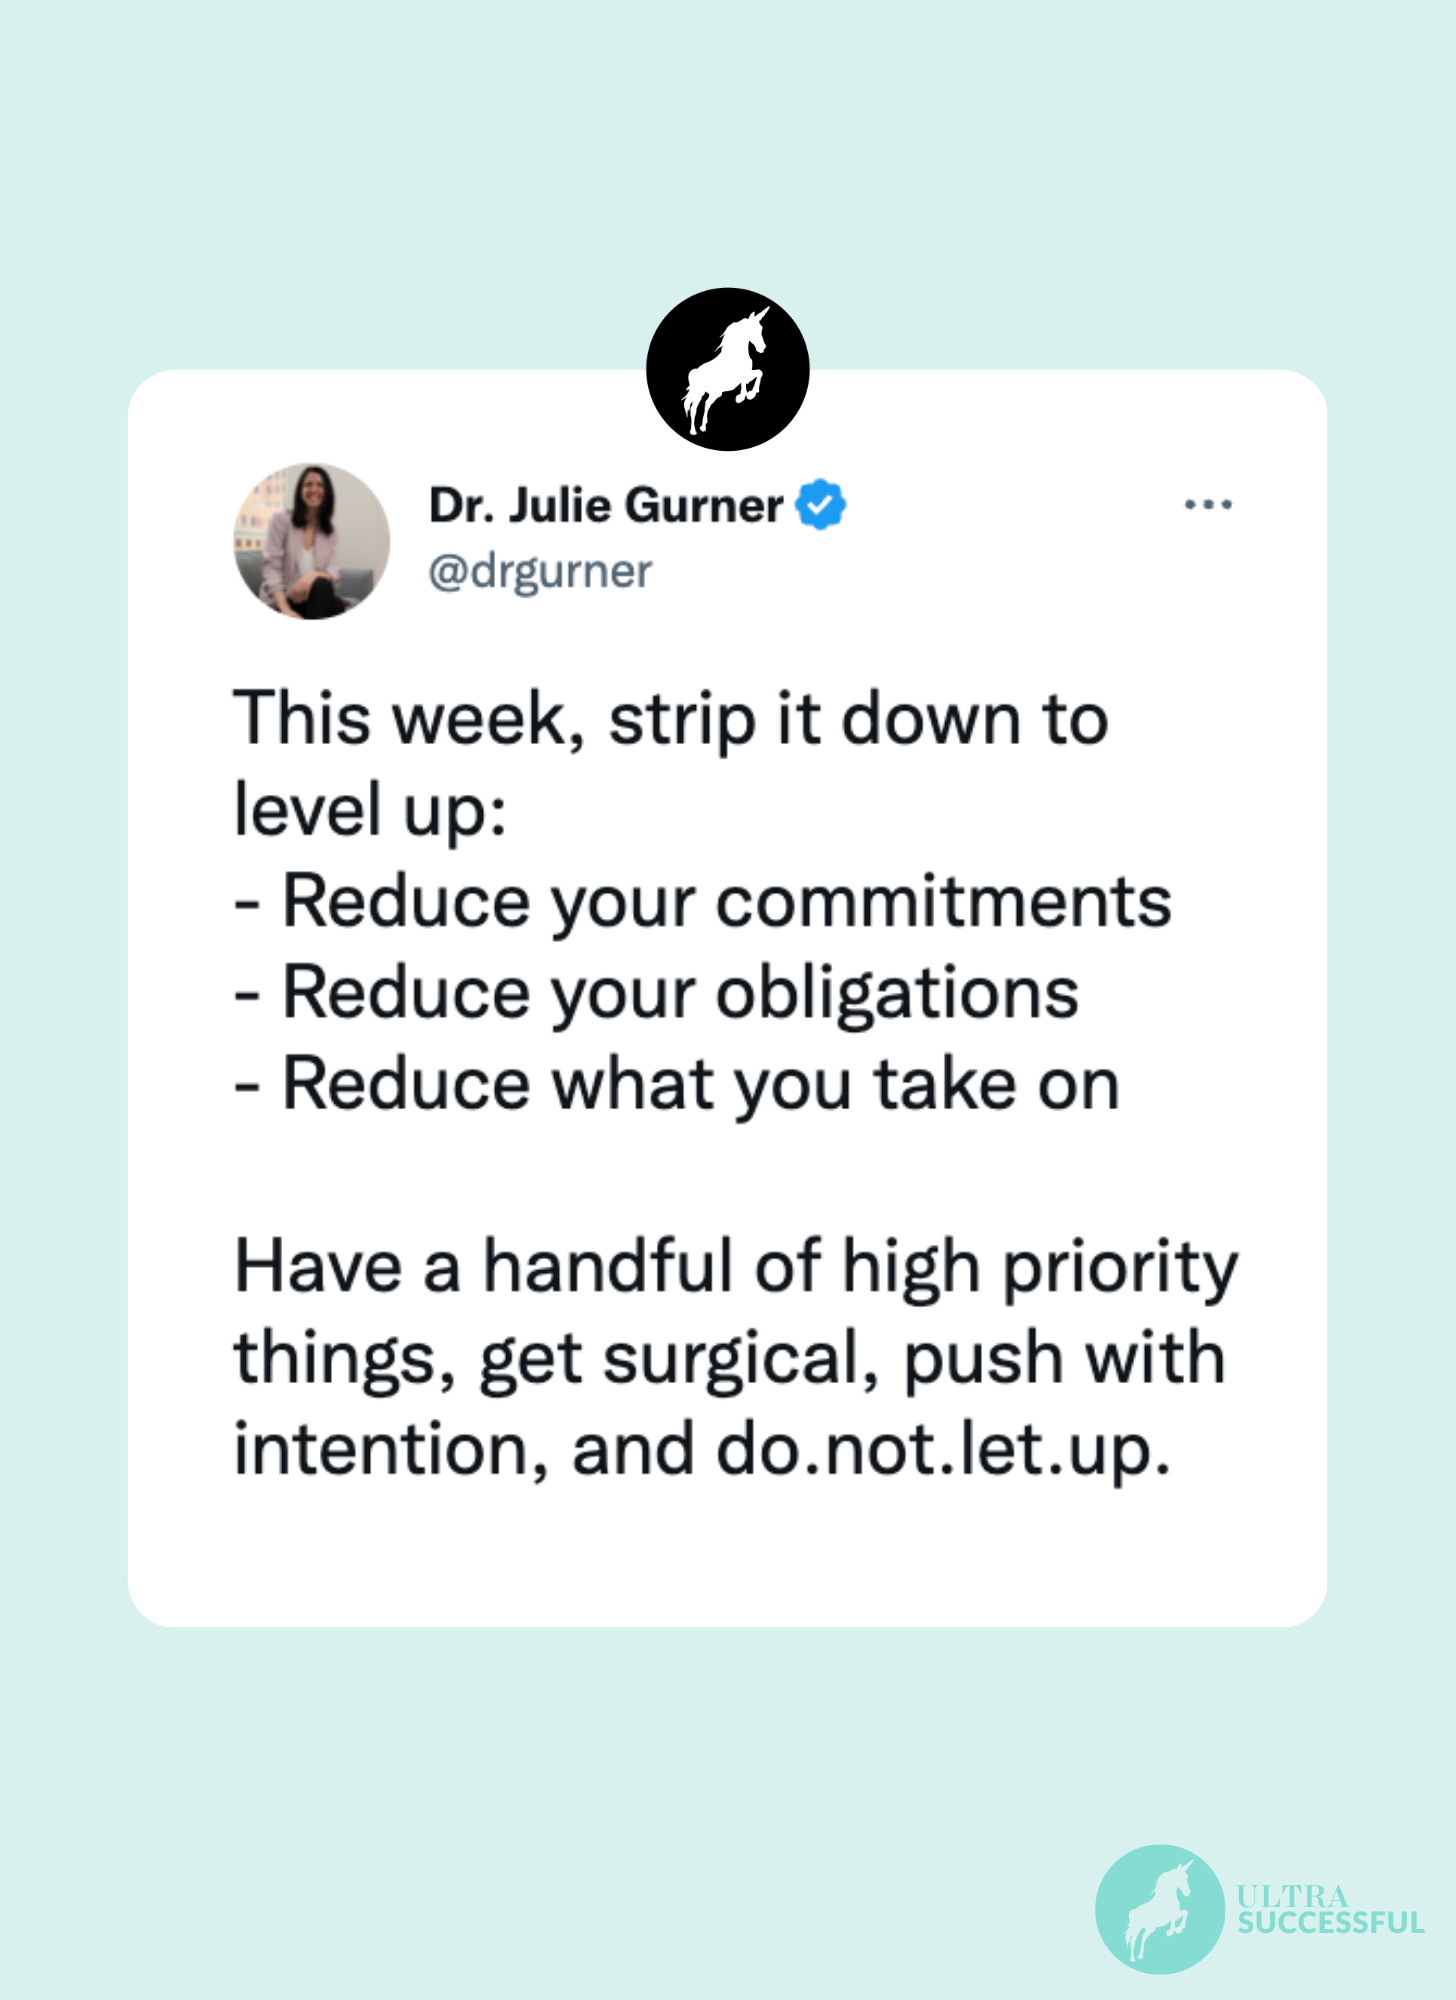 @drgurner: This week, strip it down to level up: - Reduce your commitments - Reduce your obligations - Reduce what you take on   Have a handful of high priority things, get surgical, push with intention, and do.not.let.up.